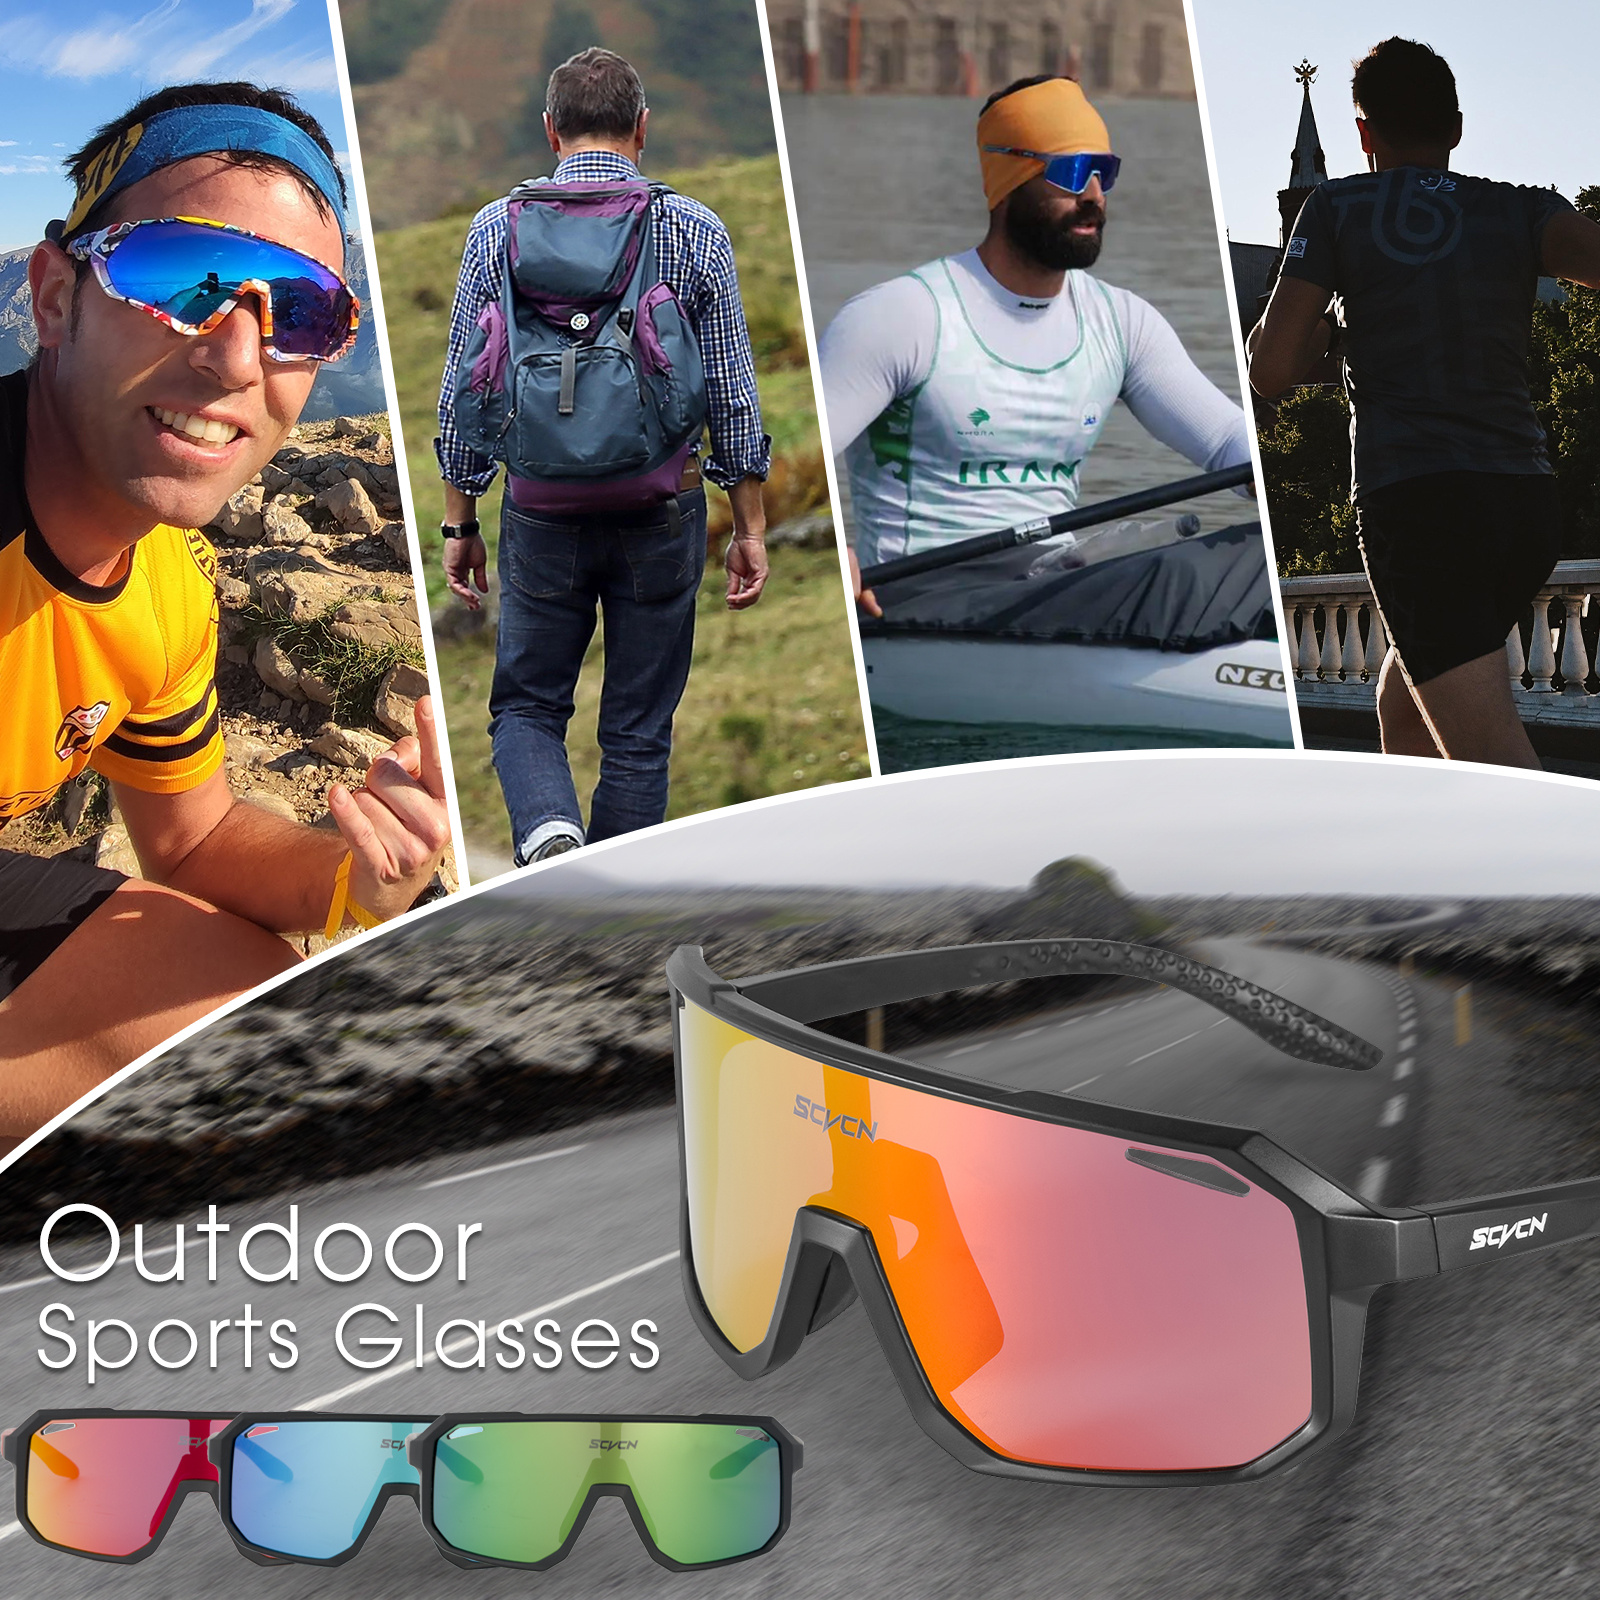 SCVCN Cycling Sunglasses Bike Mountain Glasses Outdoor Sports Hiking Glasses